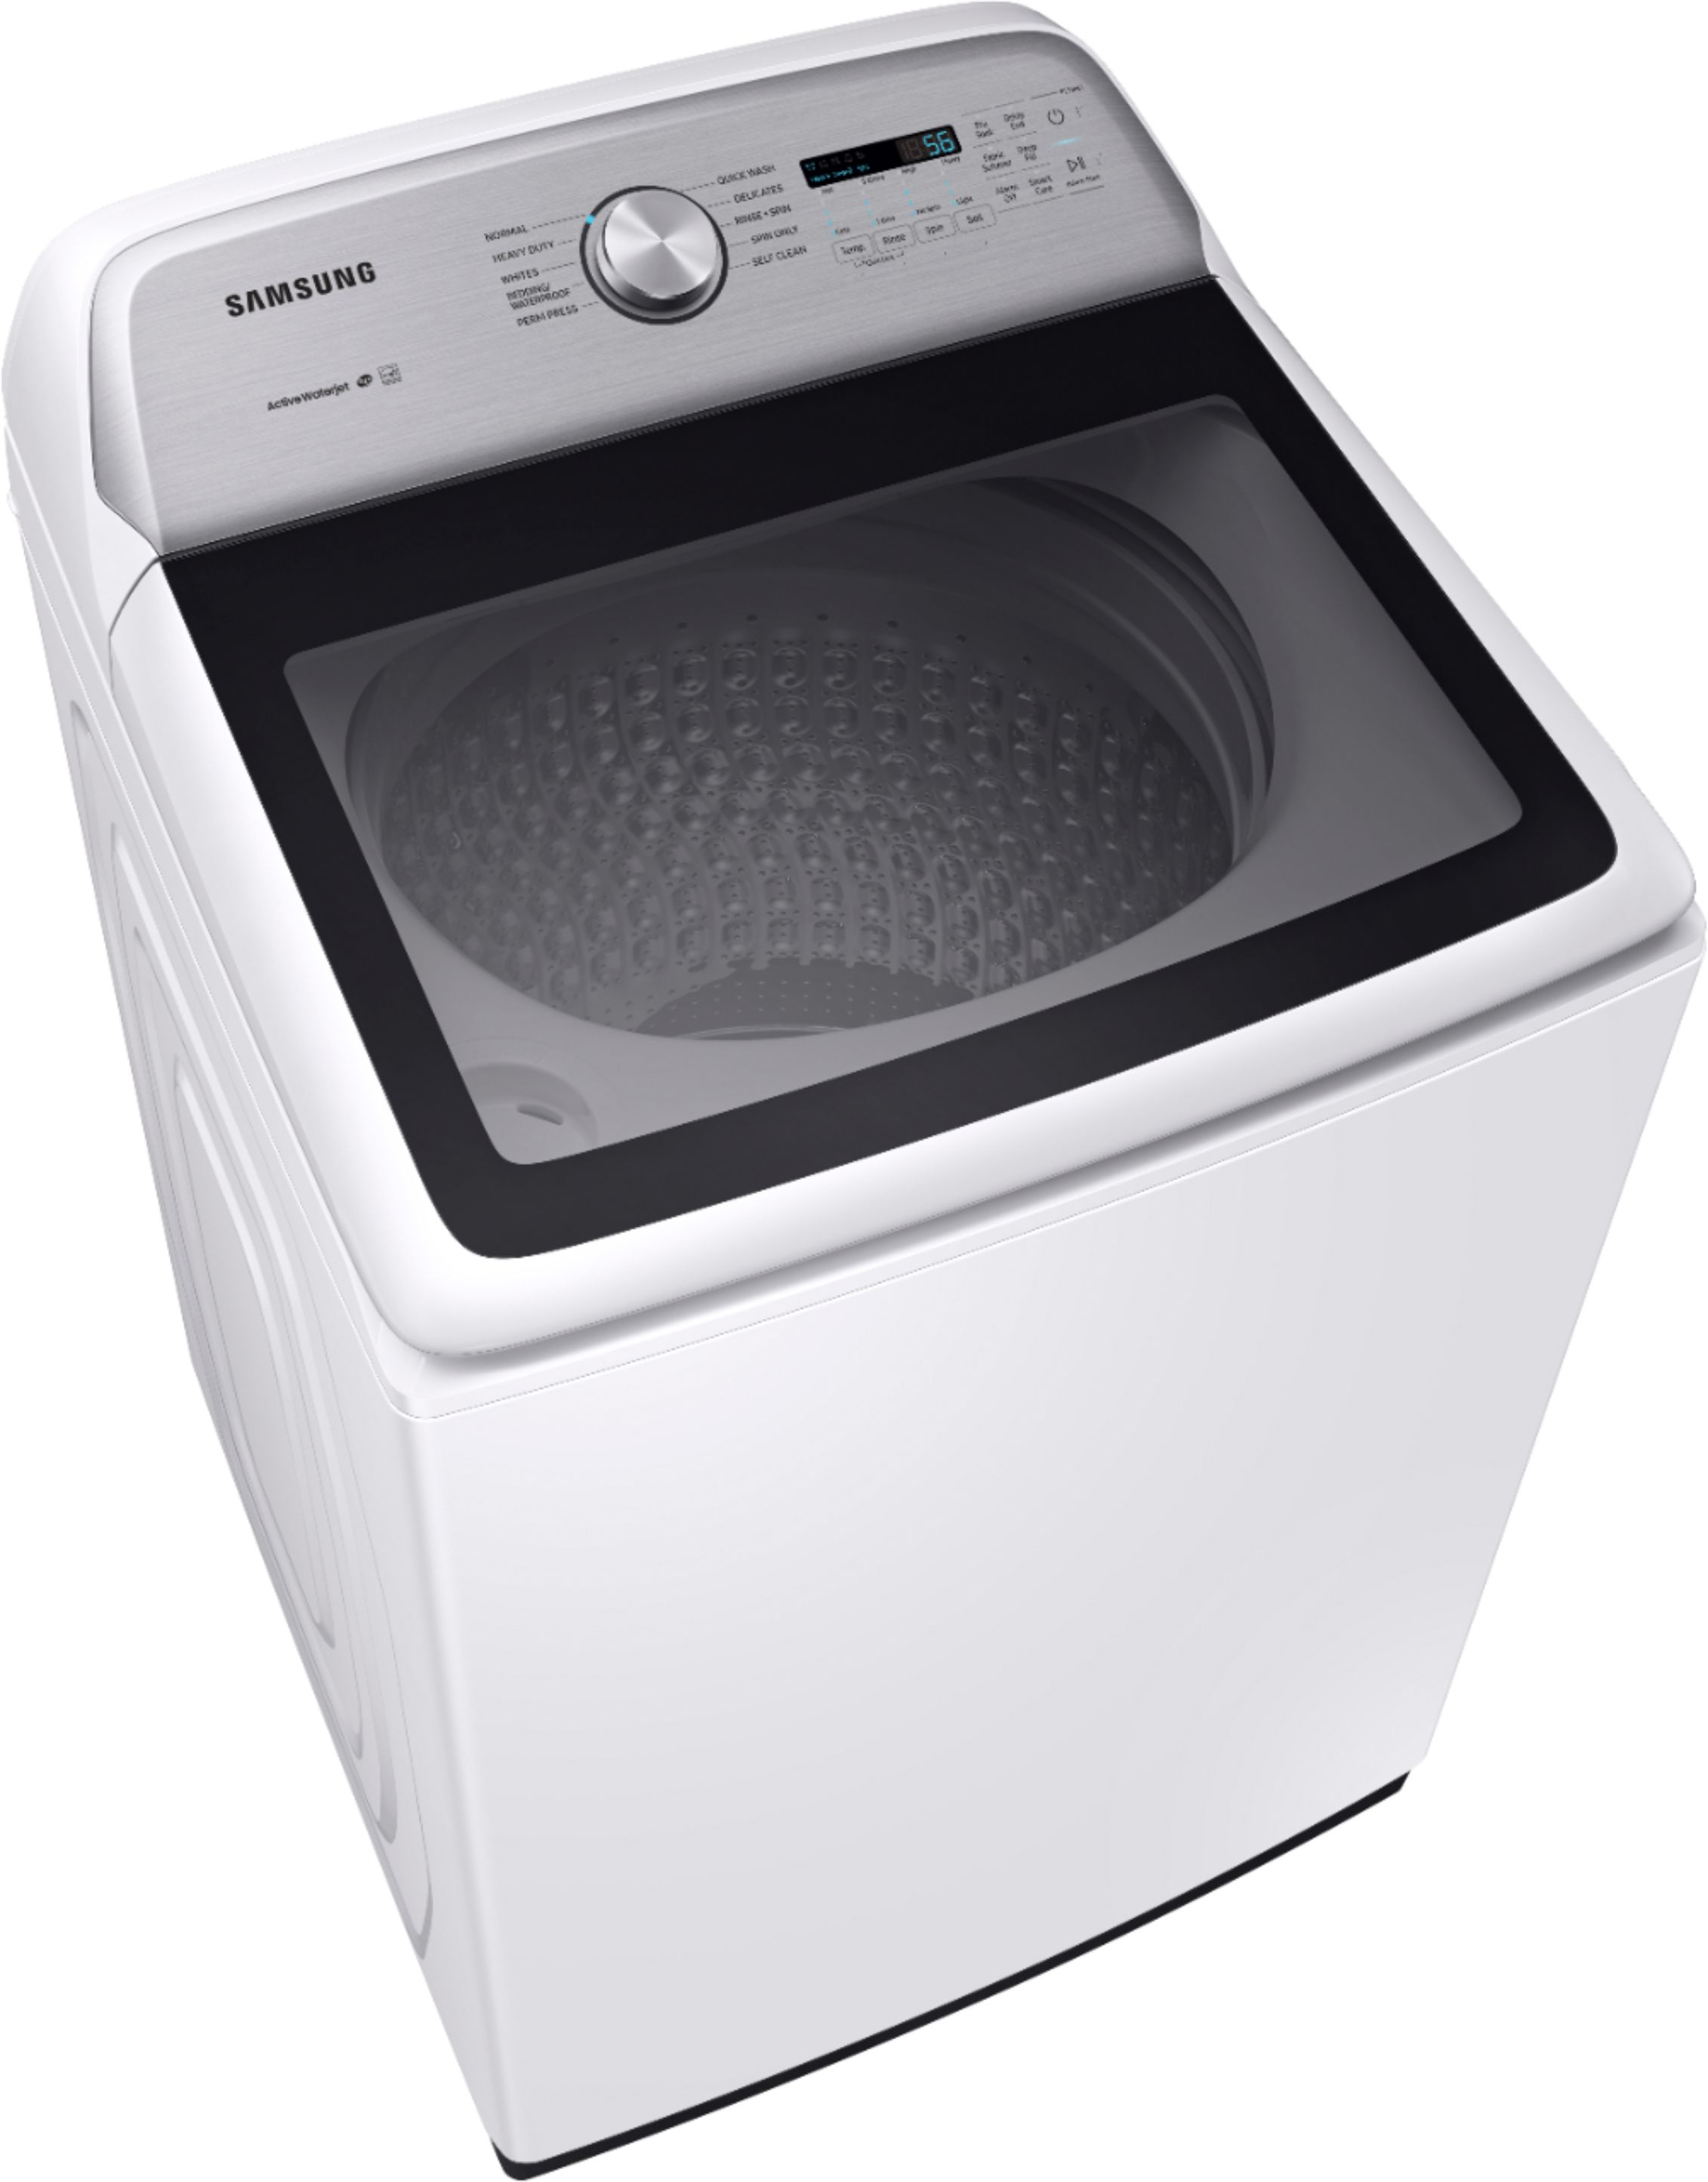 samsung-high-efficiency-top-load-washer-with-steam-champagne